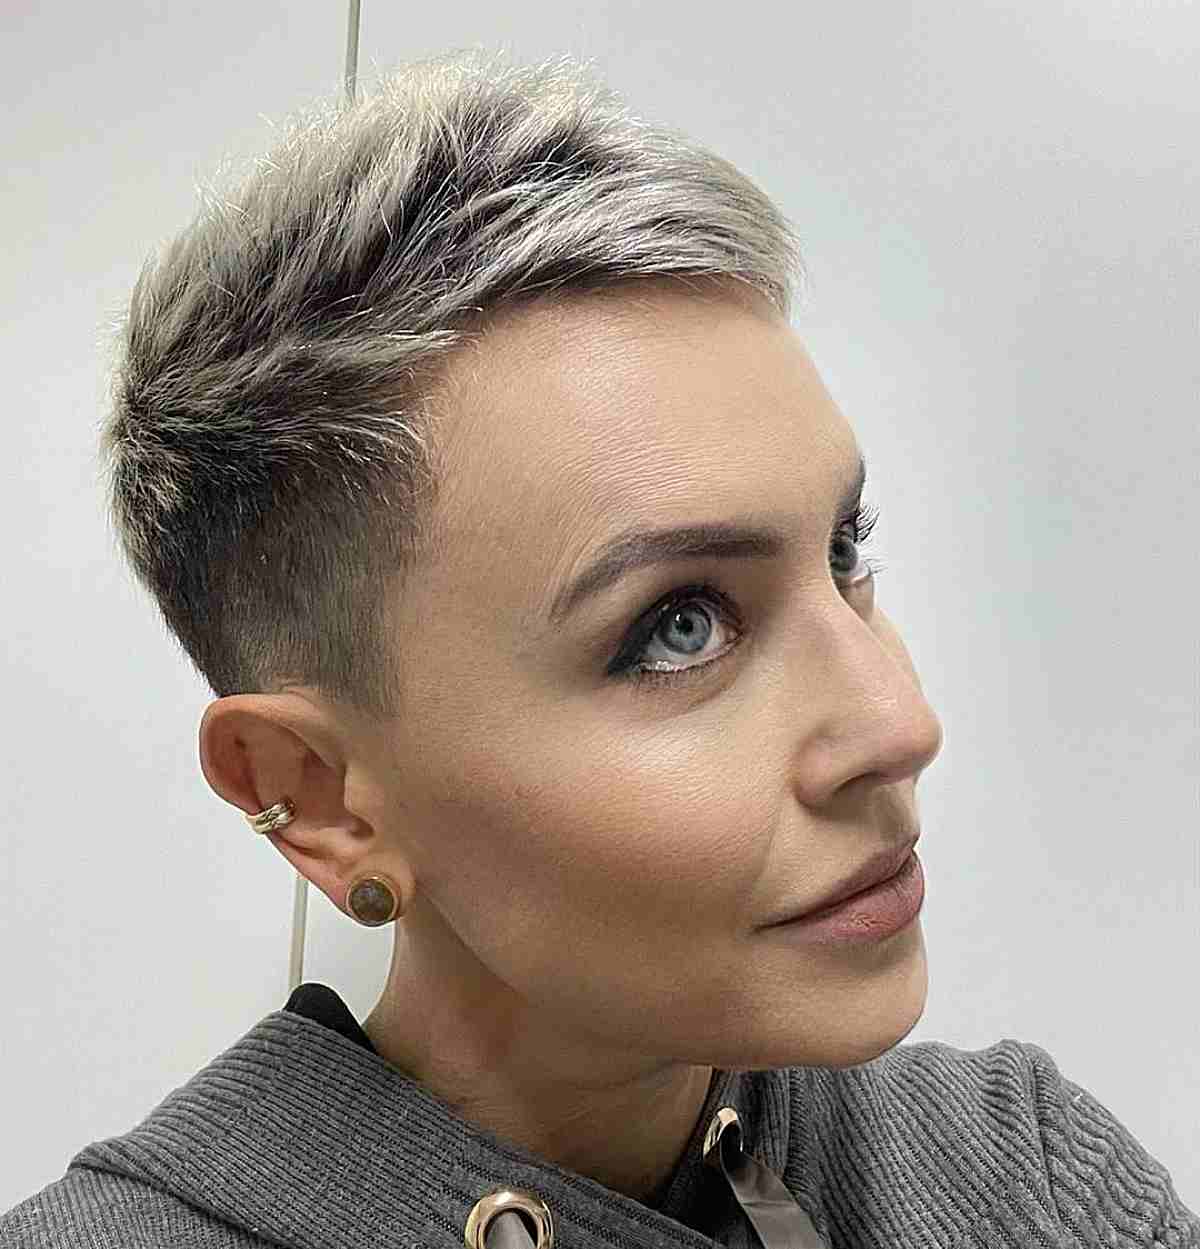 Edgy Balayage Very Short Pixie Crop